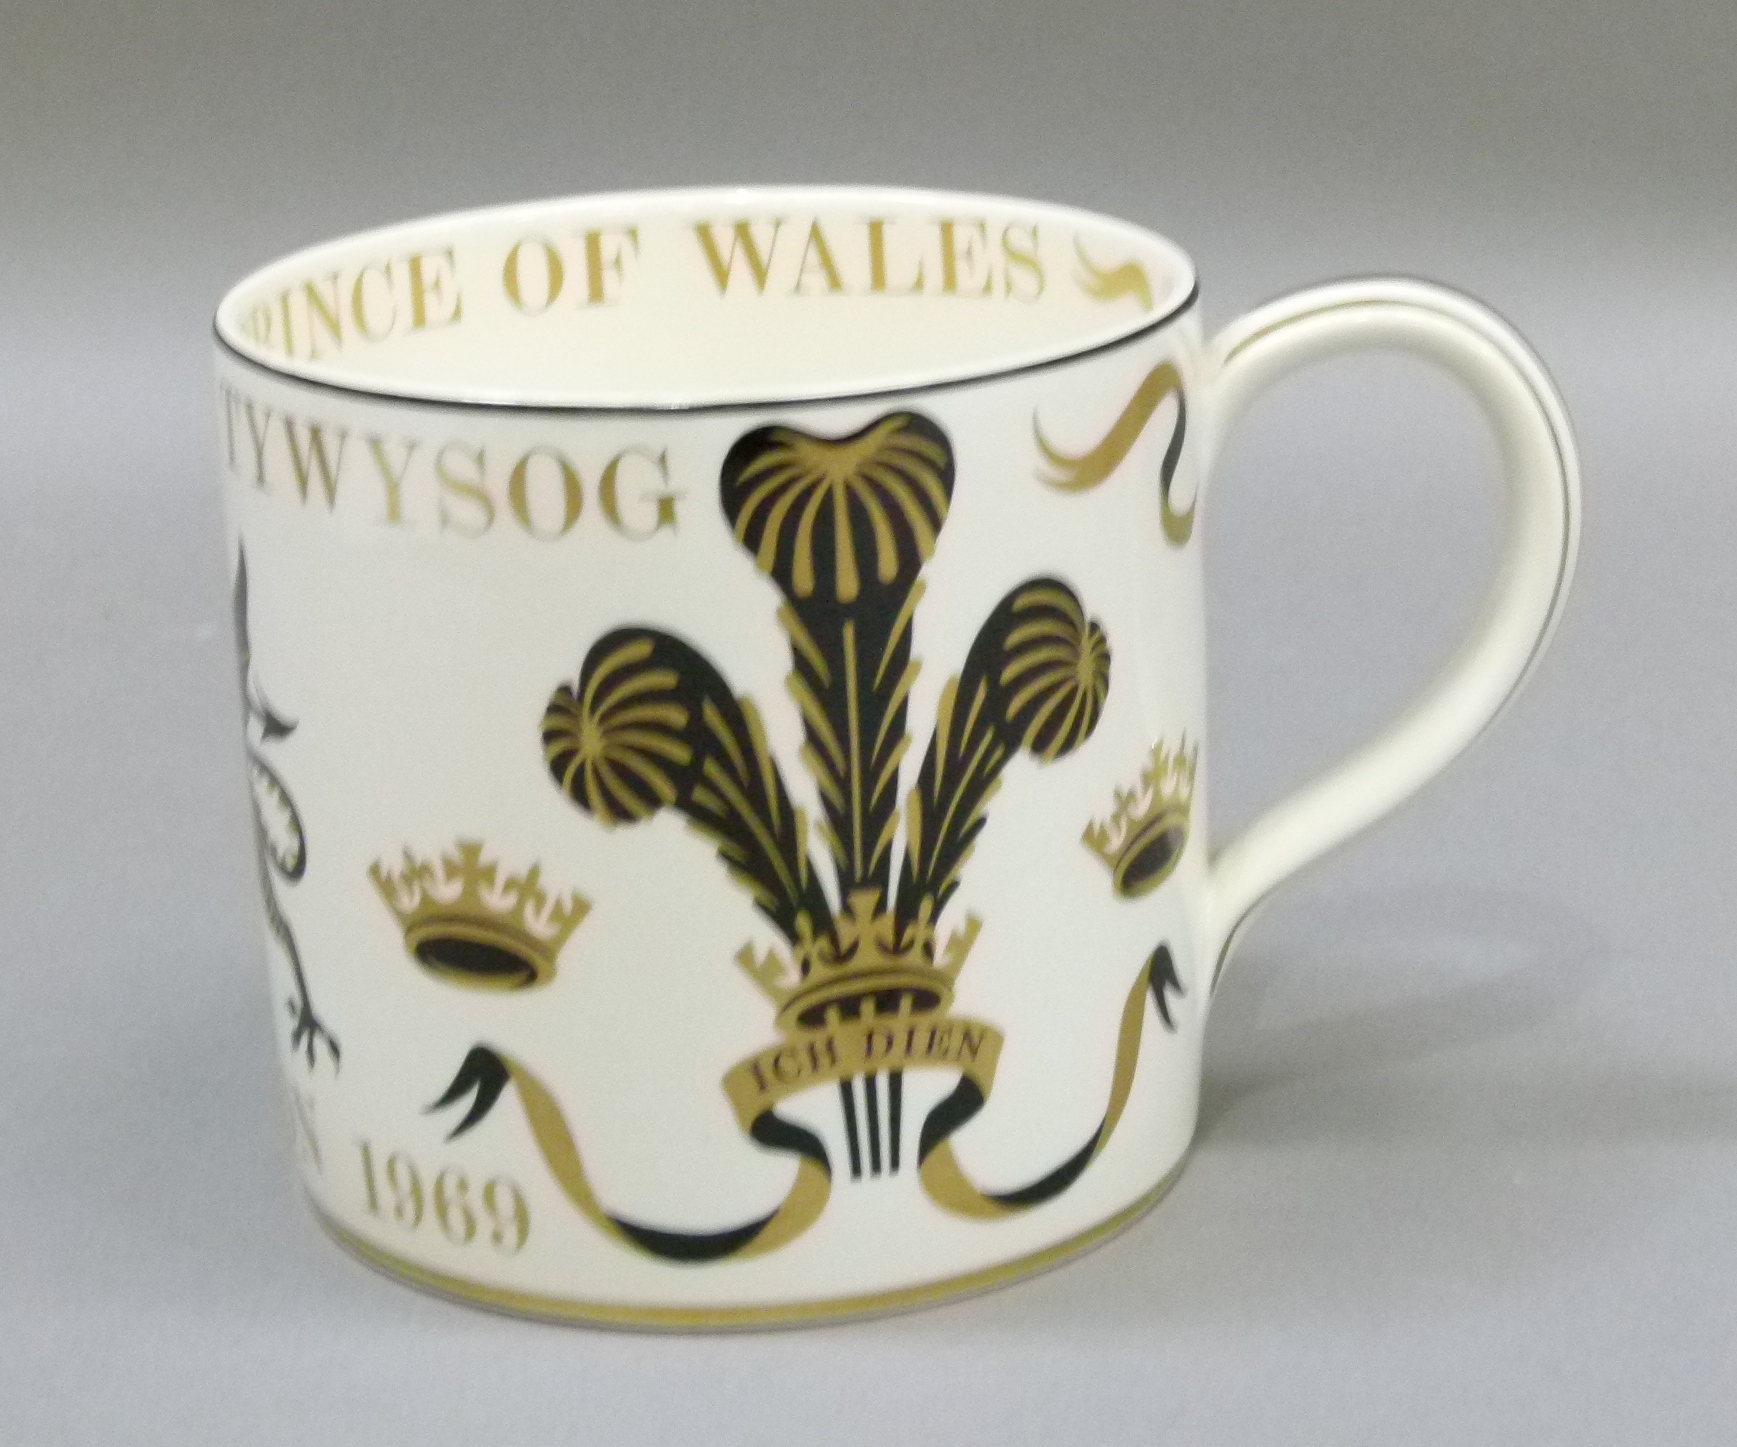 A Wedgwood commemorative mug: The Investiture of His Royal Highness Prince Charles as Prince of - Image 3 of 4